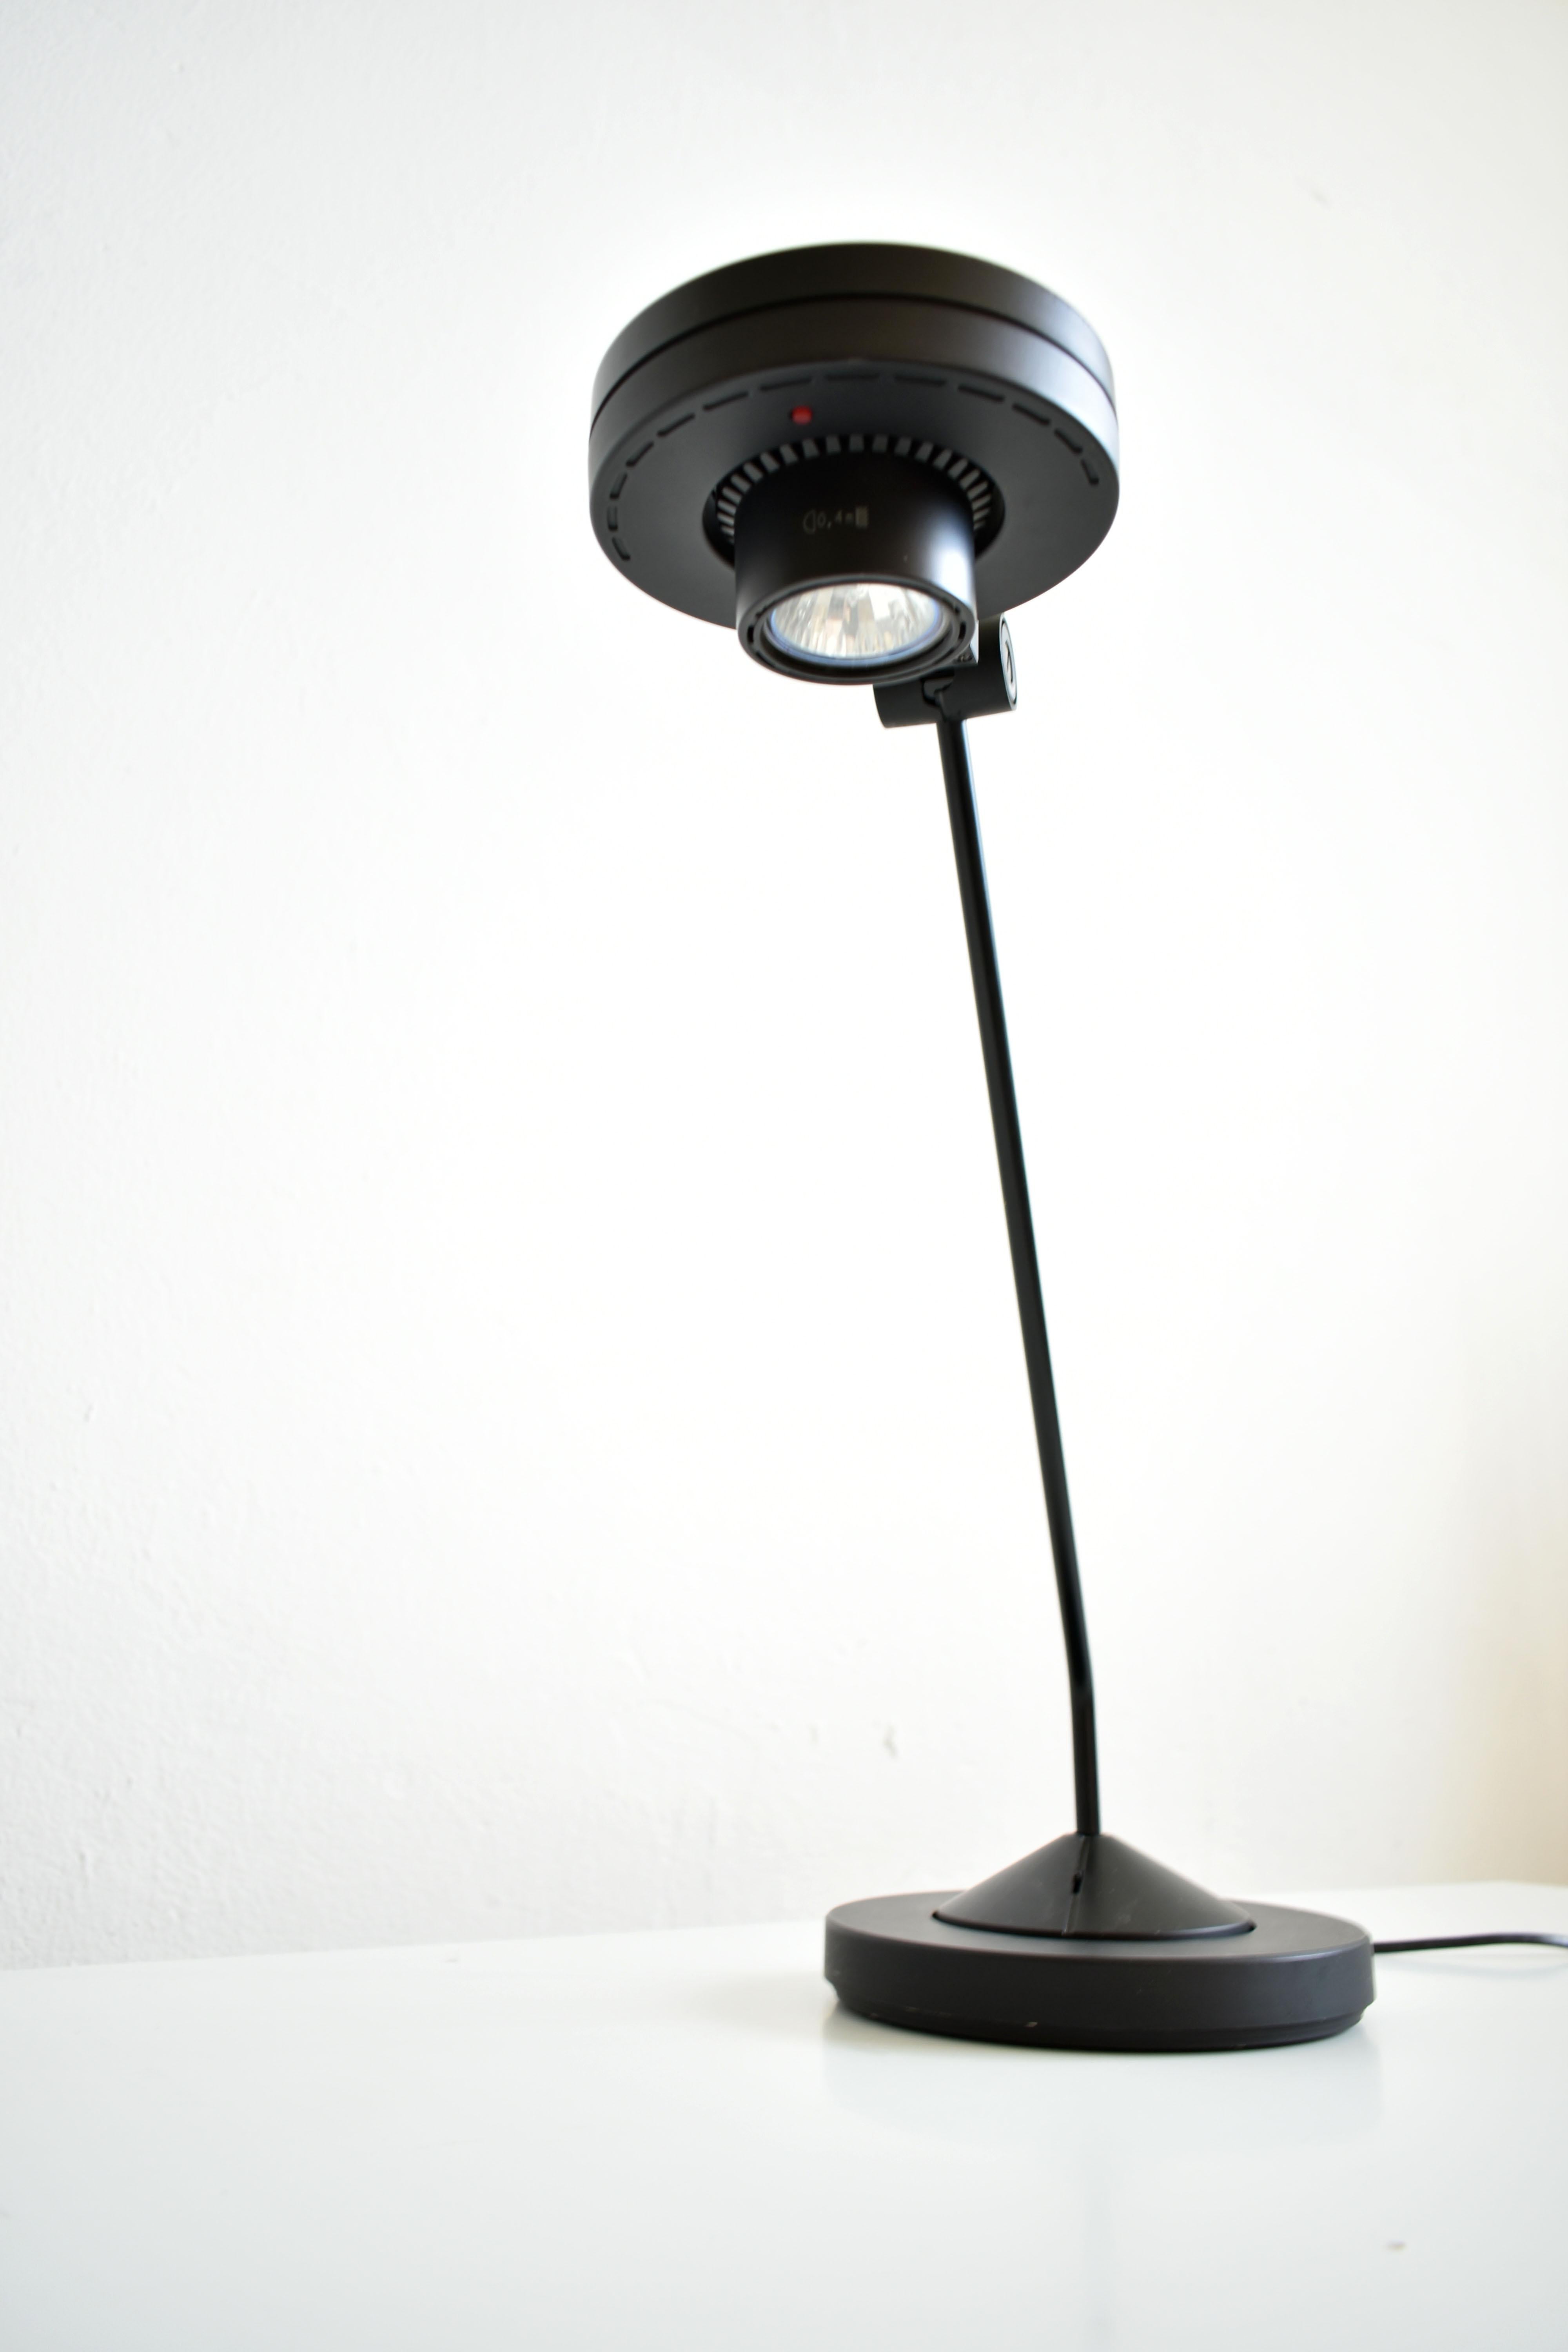 Late 20th Century Postmodern Halogen Desk Lamp 'Discus', Hartmut S. Engel for Staff, Germany 1980s For Sale